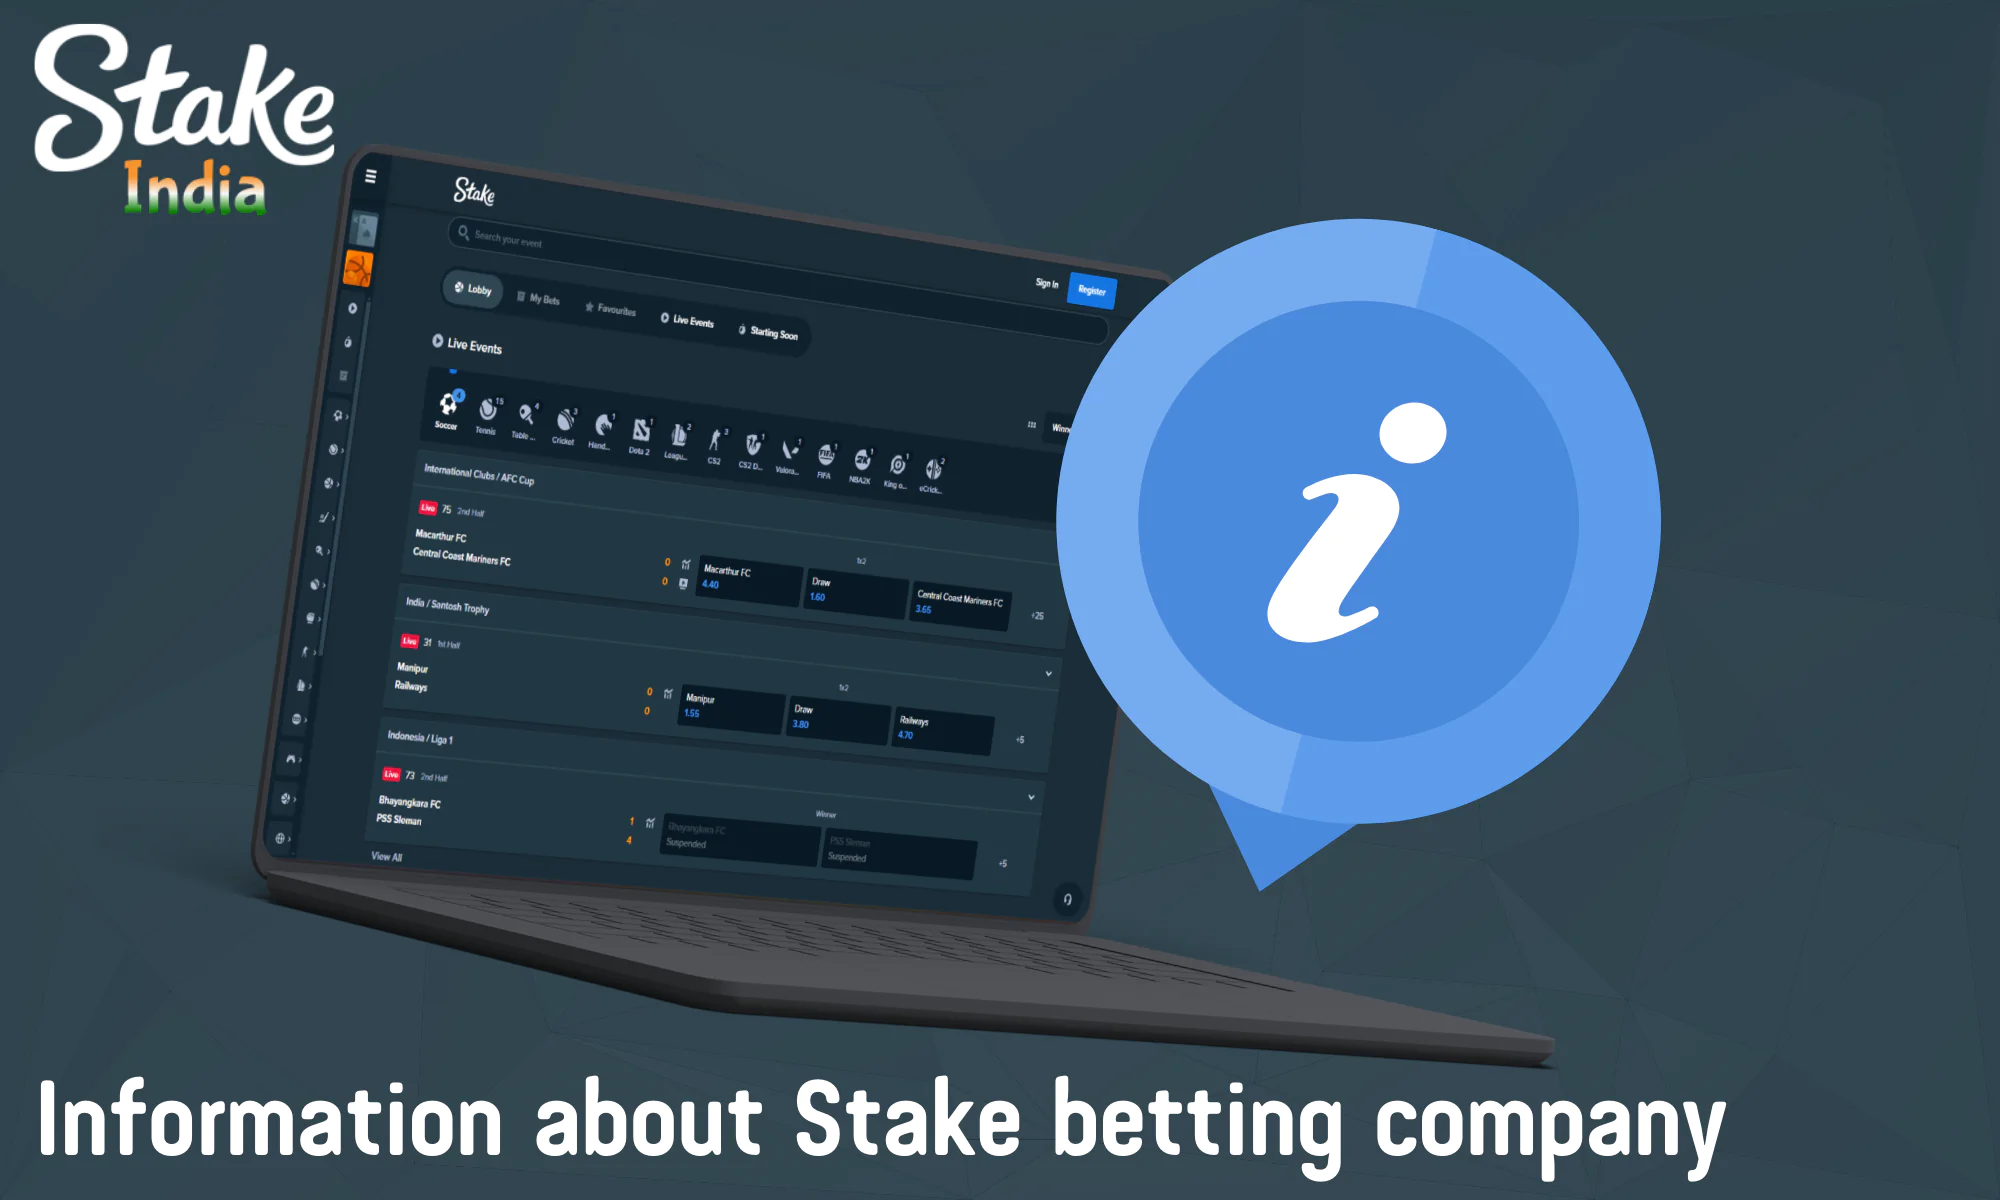 Read more about the bookmaker Stake